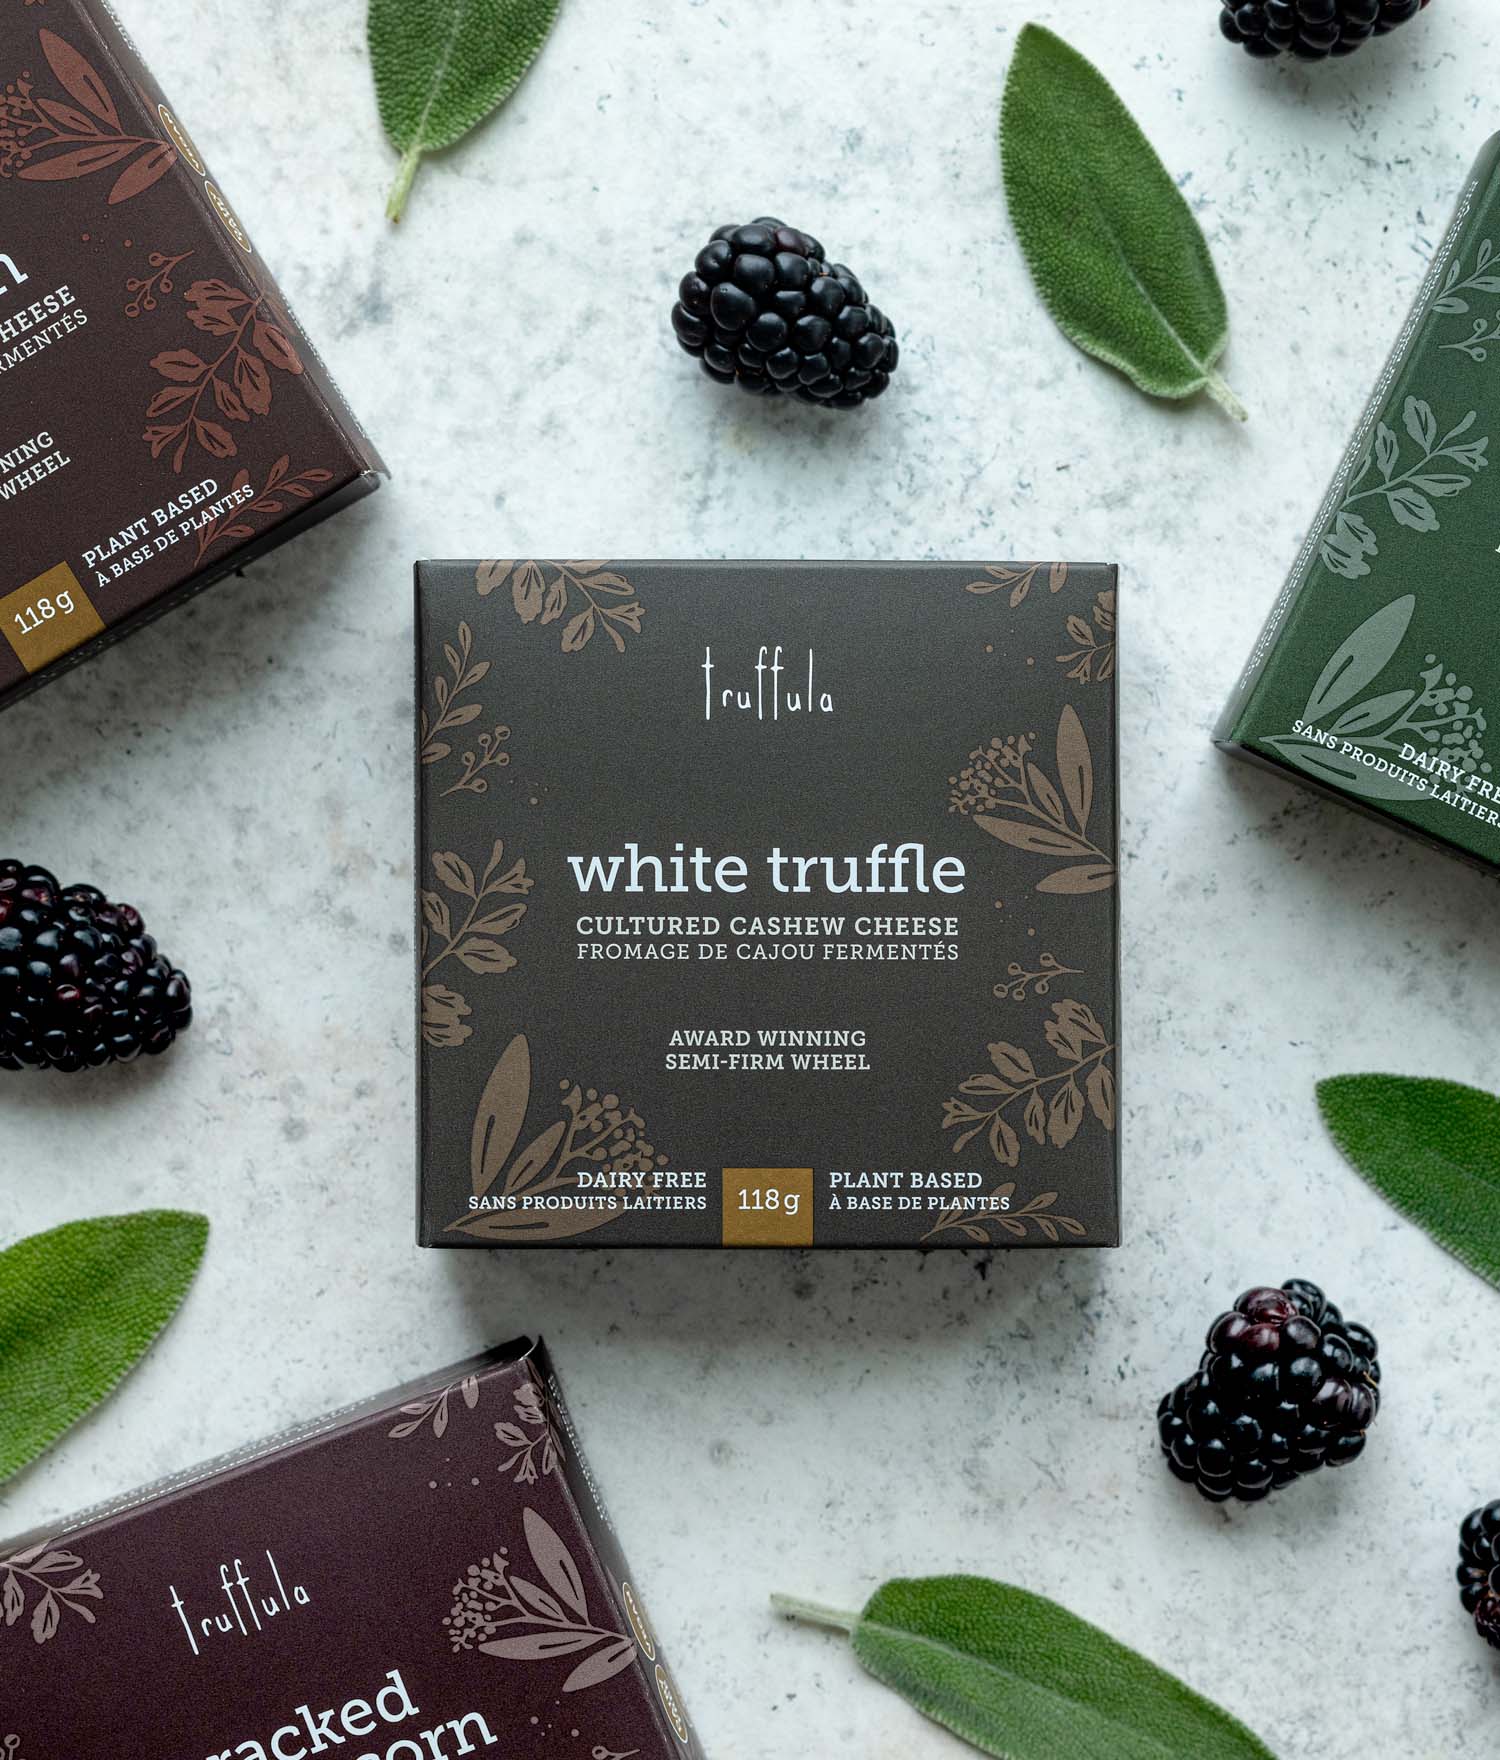 Brown square cheese box with text 'White Truffle' on the front, on white background, surrounded by fresh sage leaves and blackberries.